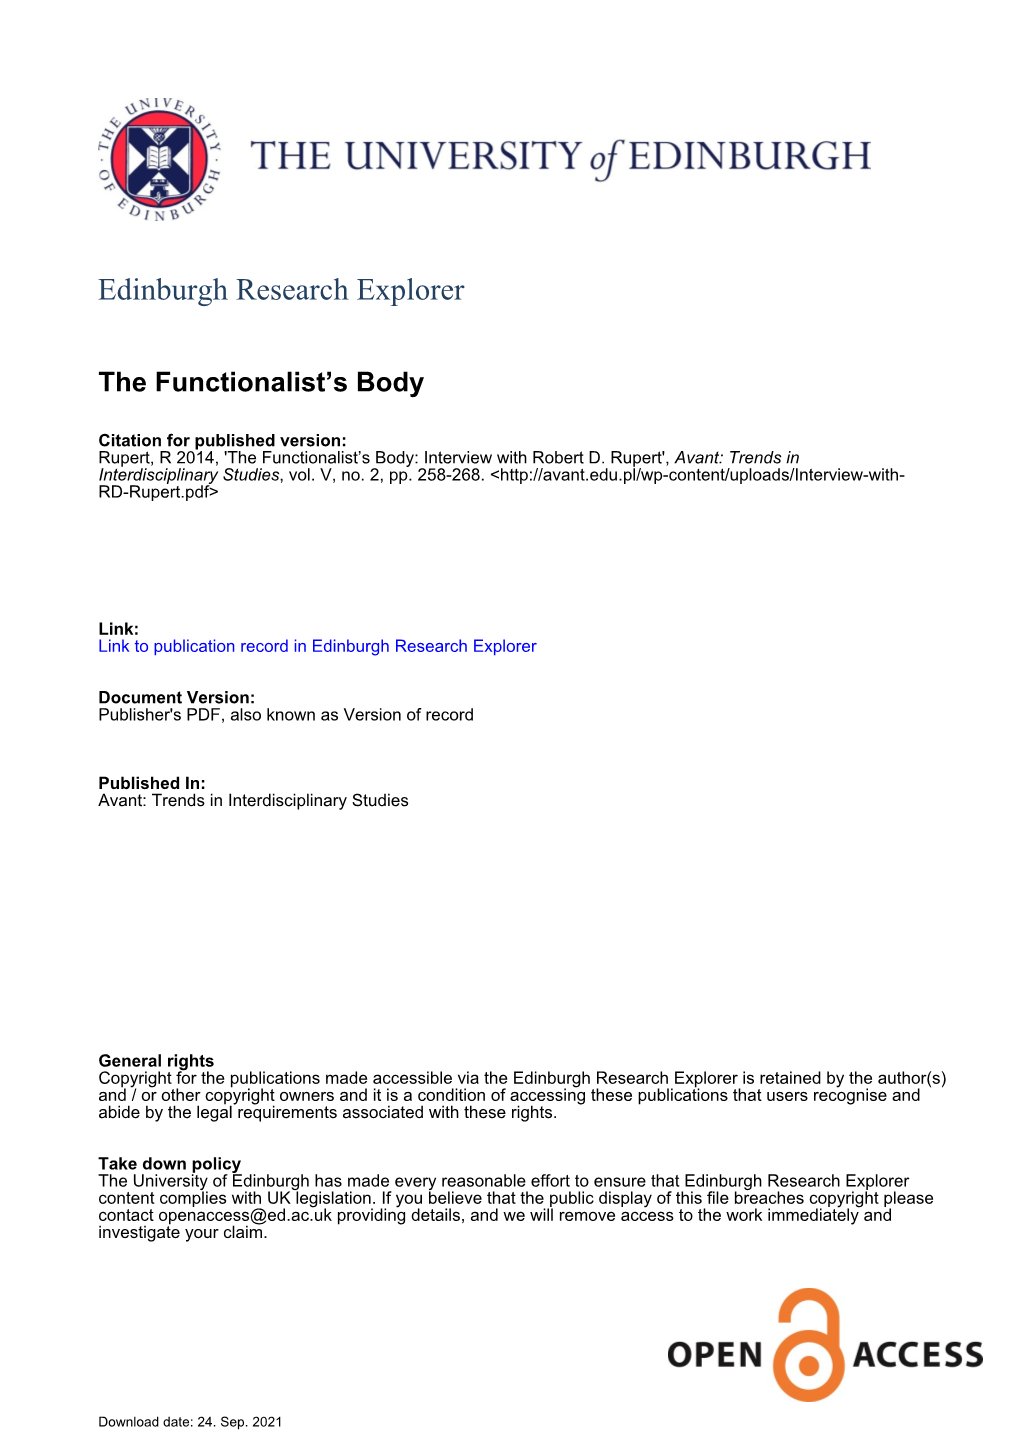 The Functionalist's Body